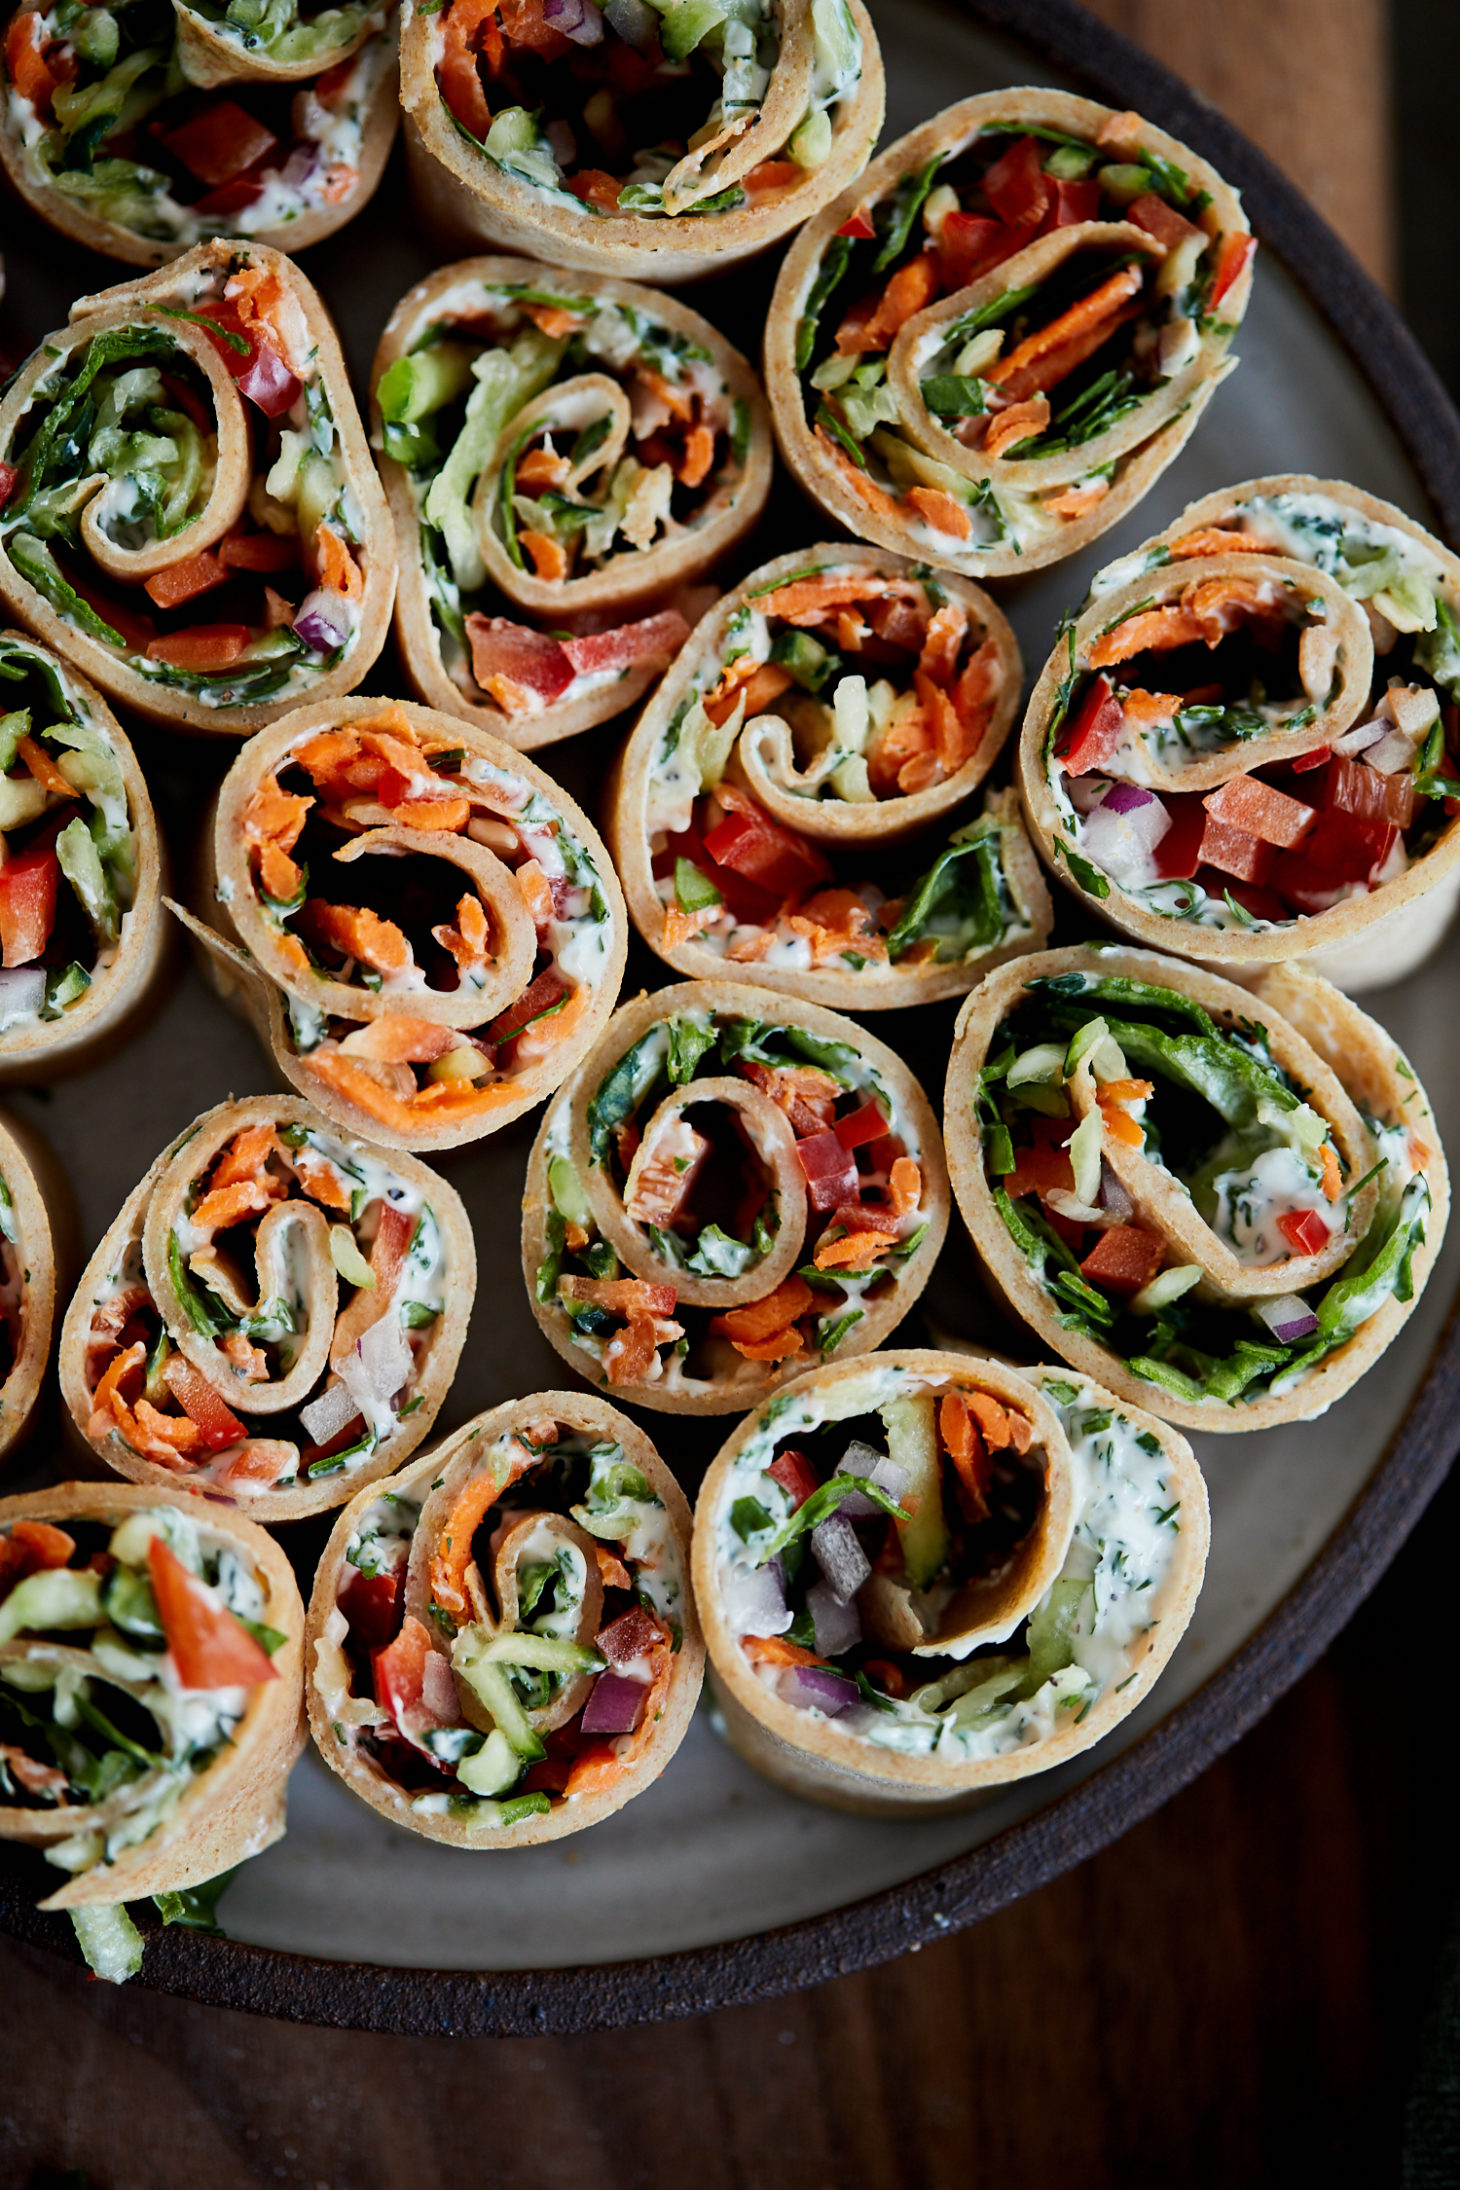 Cream Cheese Roll-ups with Crepes and Vegetables